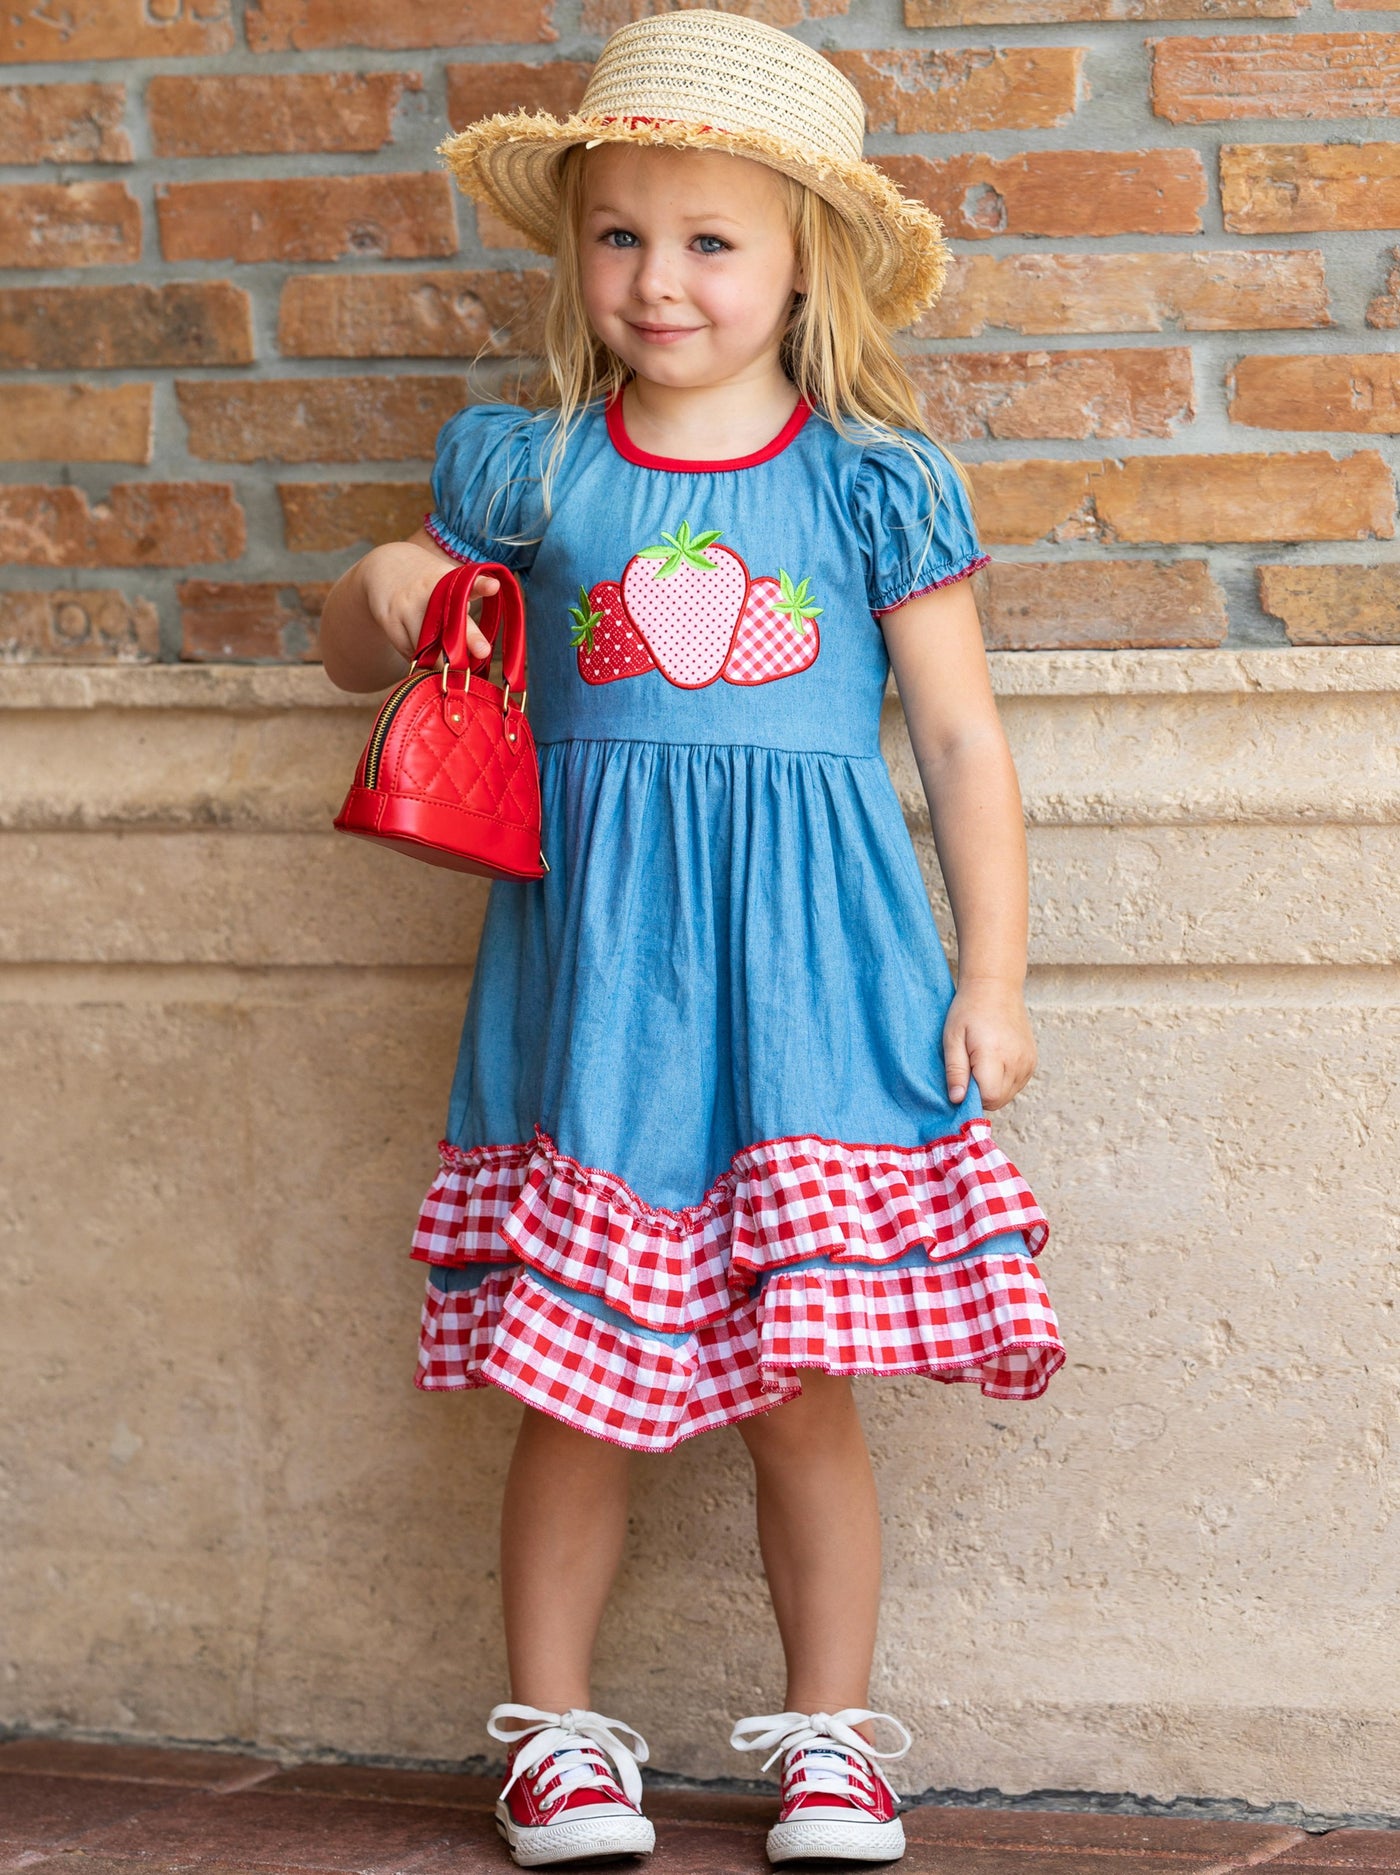 girls denim dress has a strawberries applique and red and white plaid ruffles